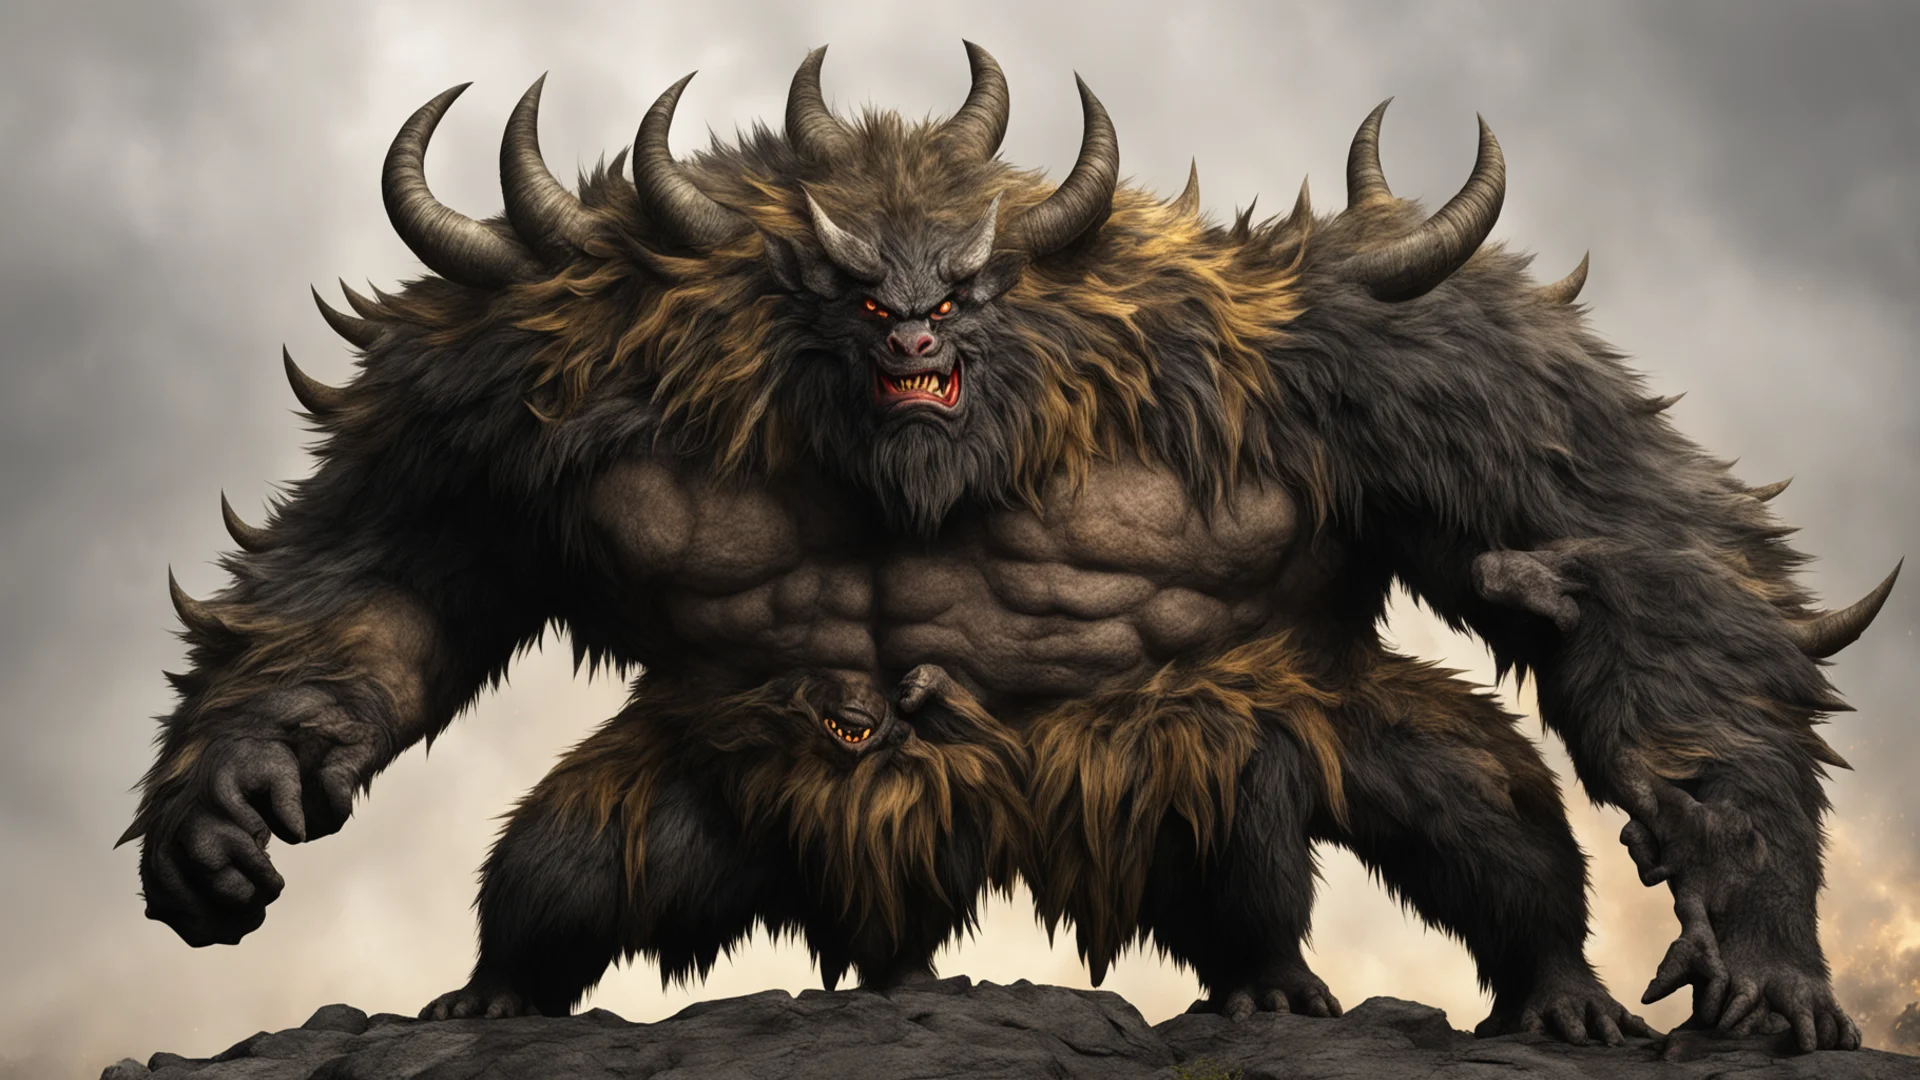 rajang in a striking pose amazing awesome portrait 2 wide